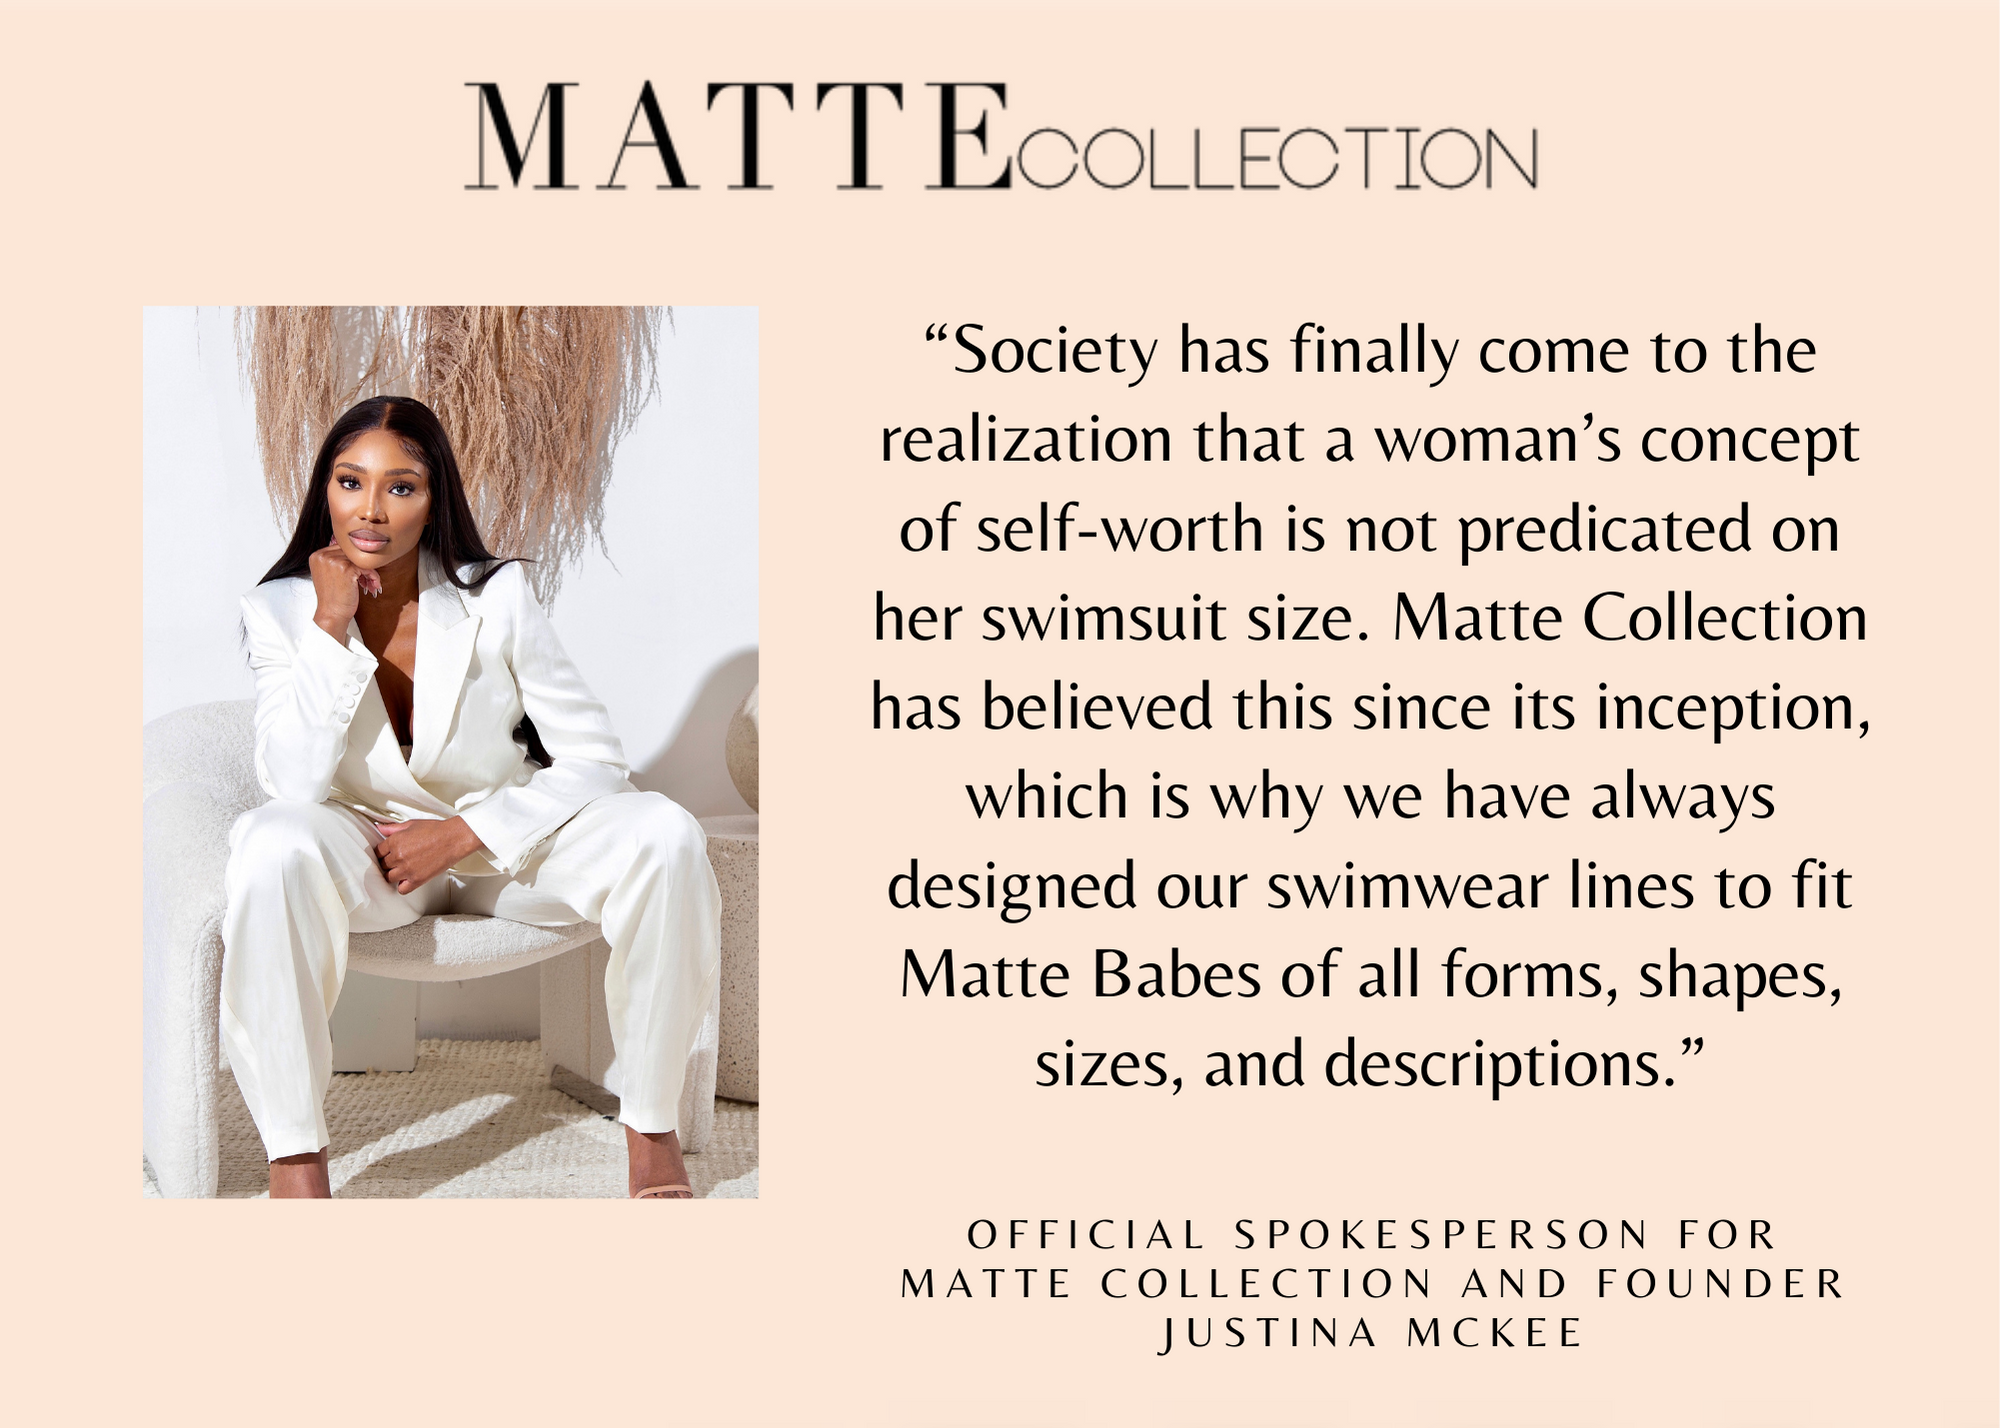 Matte Collection, Wednesday, May 25, 2022, Press release picture